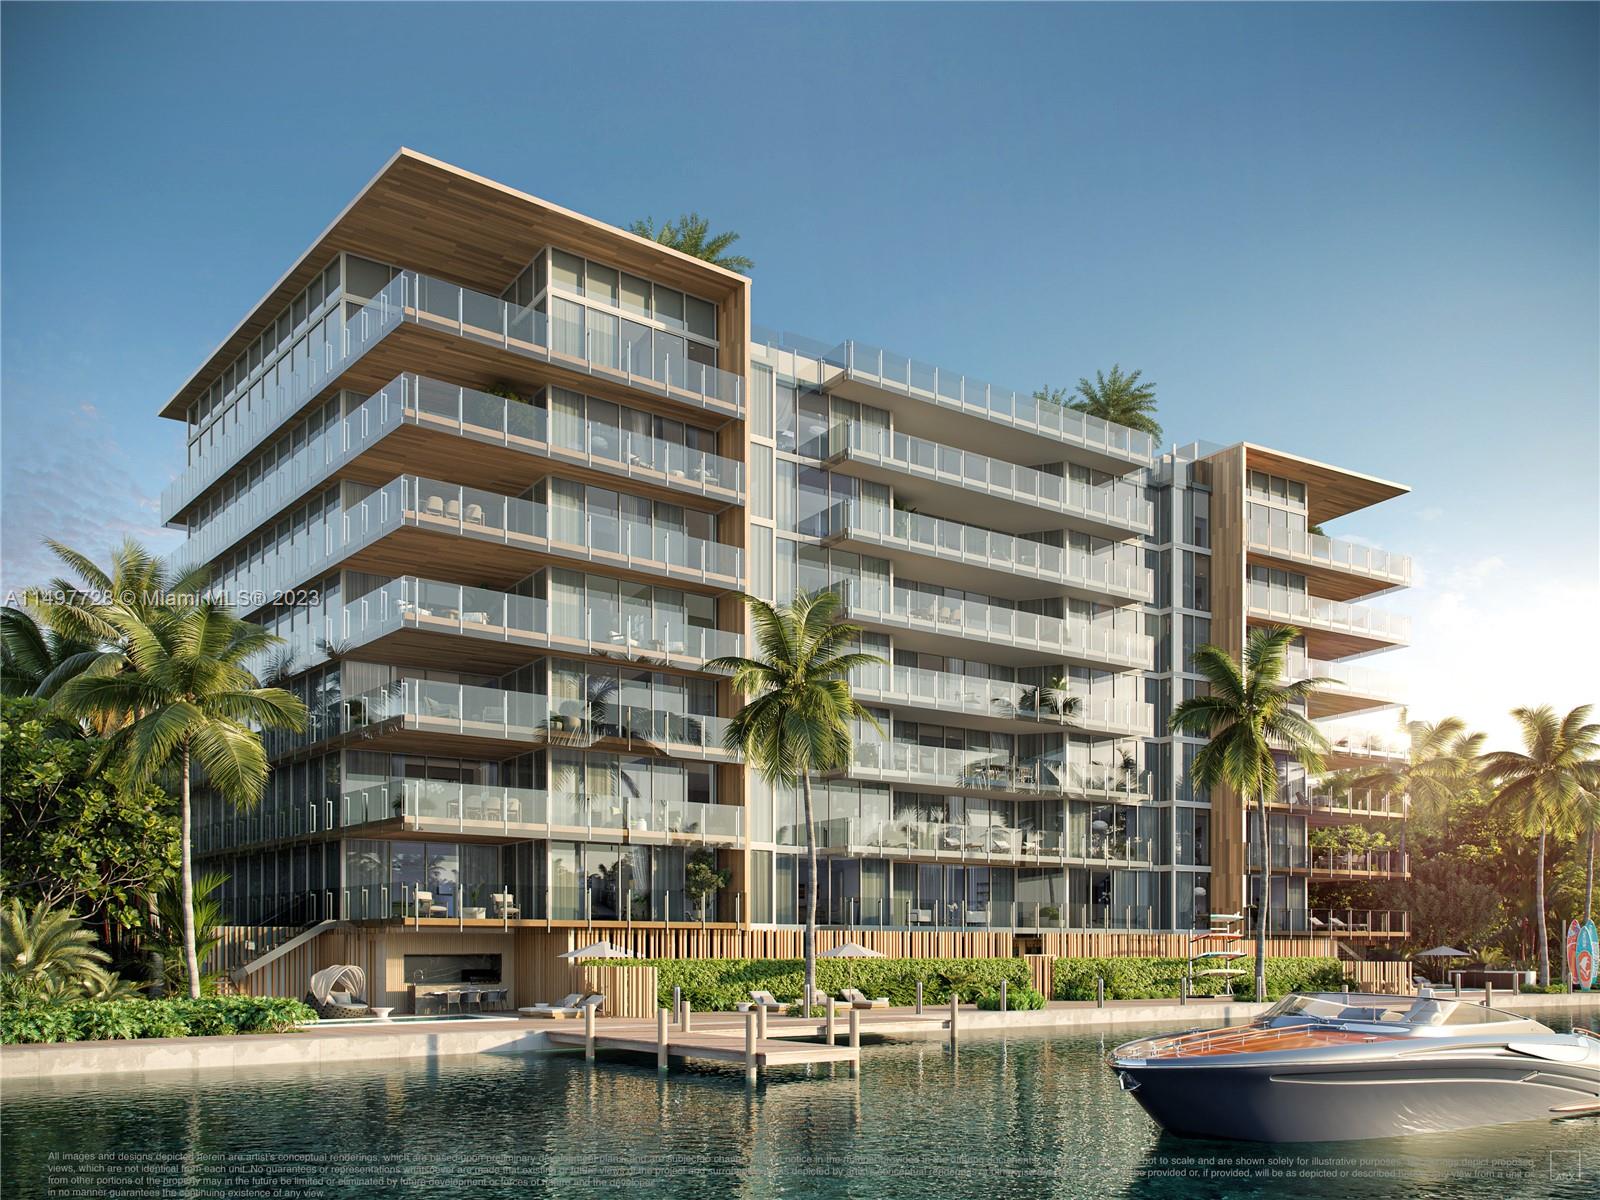 Experience luxury living at 9727 E Bay Harbor unit 201. This waterfront residence boasts stunning views, a private pool deck, and impeccable finishes. Designed by Kobi Karp, it offers sprawling living areas, private boat slip, and resort-like amenities, including an infinity pool and rooftop deck. Immerse yourself in paradise at La Mare.